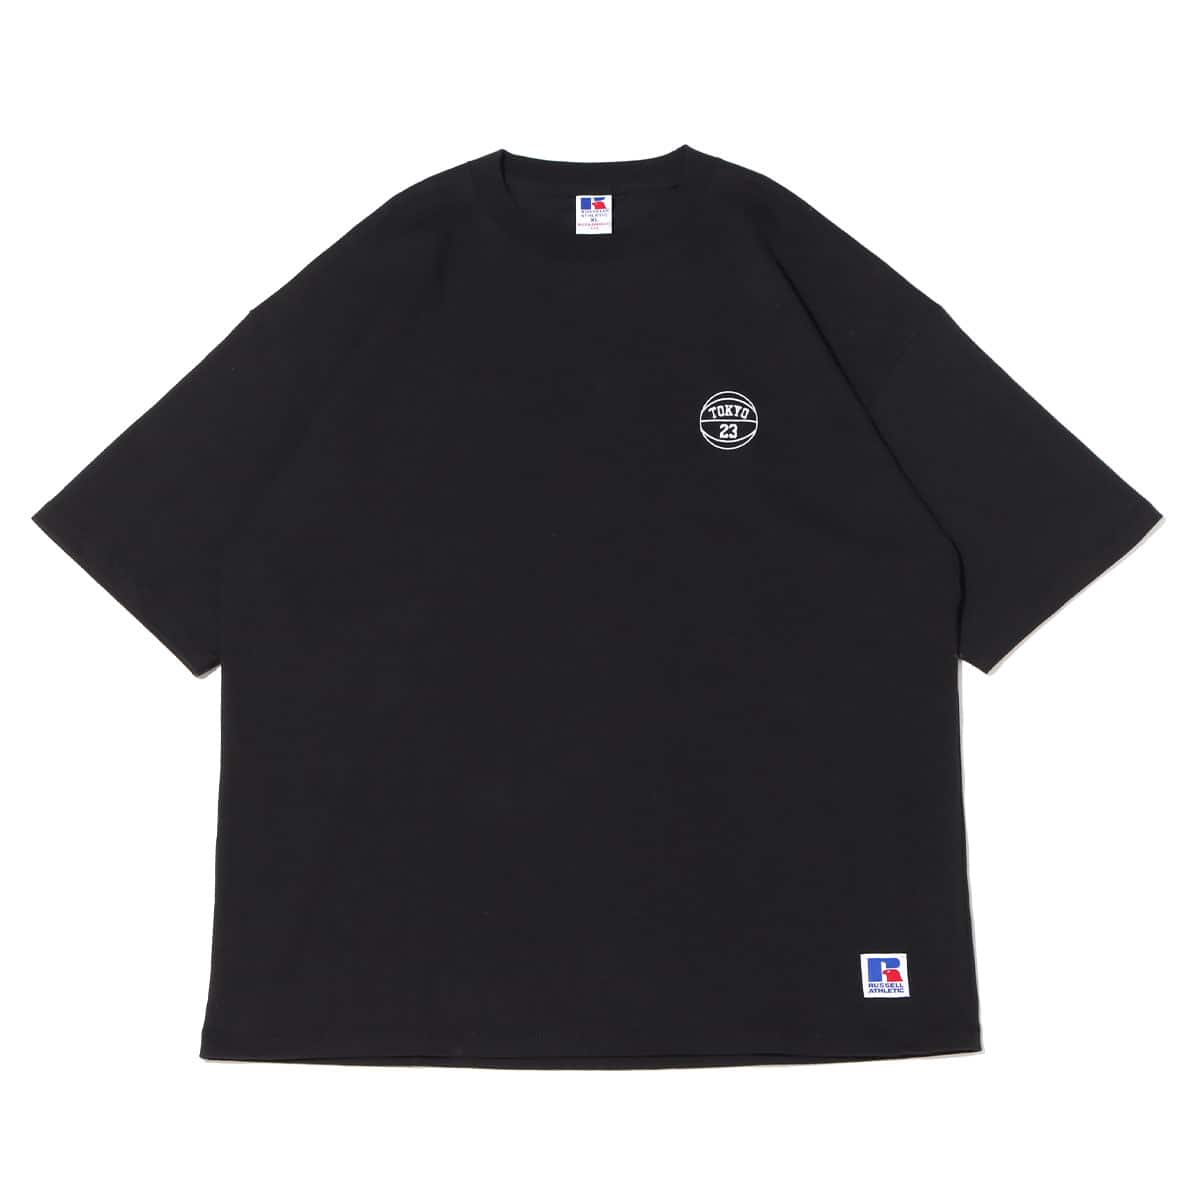 TOKYO 23 x RUSSELL ATHLETIC EMBROIDERY LOGO TEE BLACK 22SS-S_photo_large